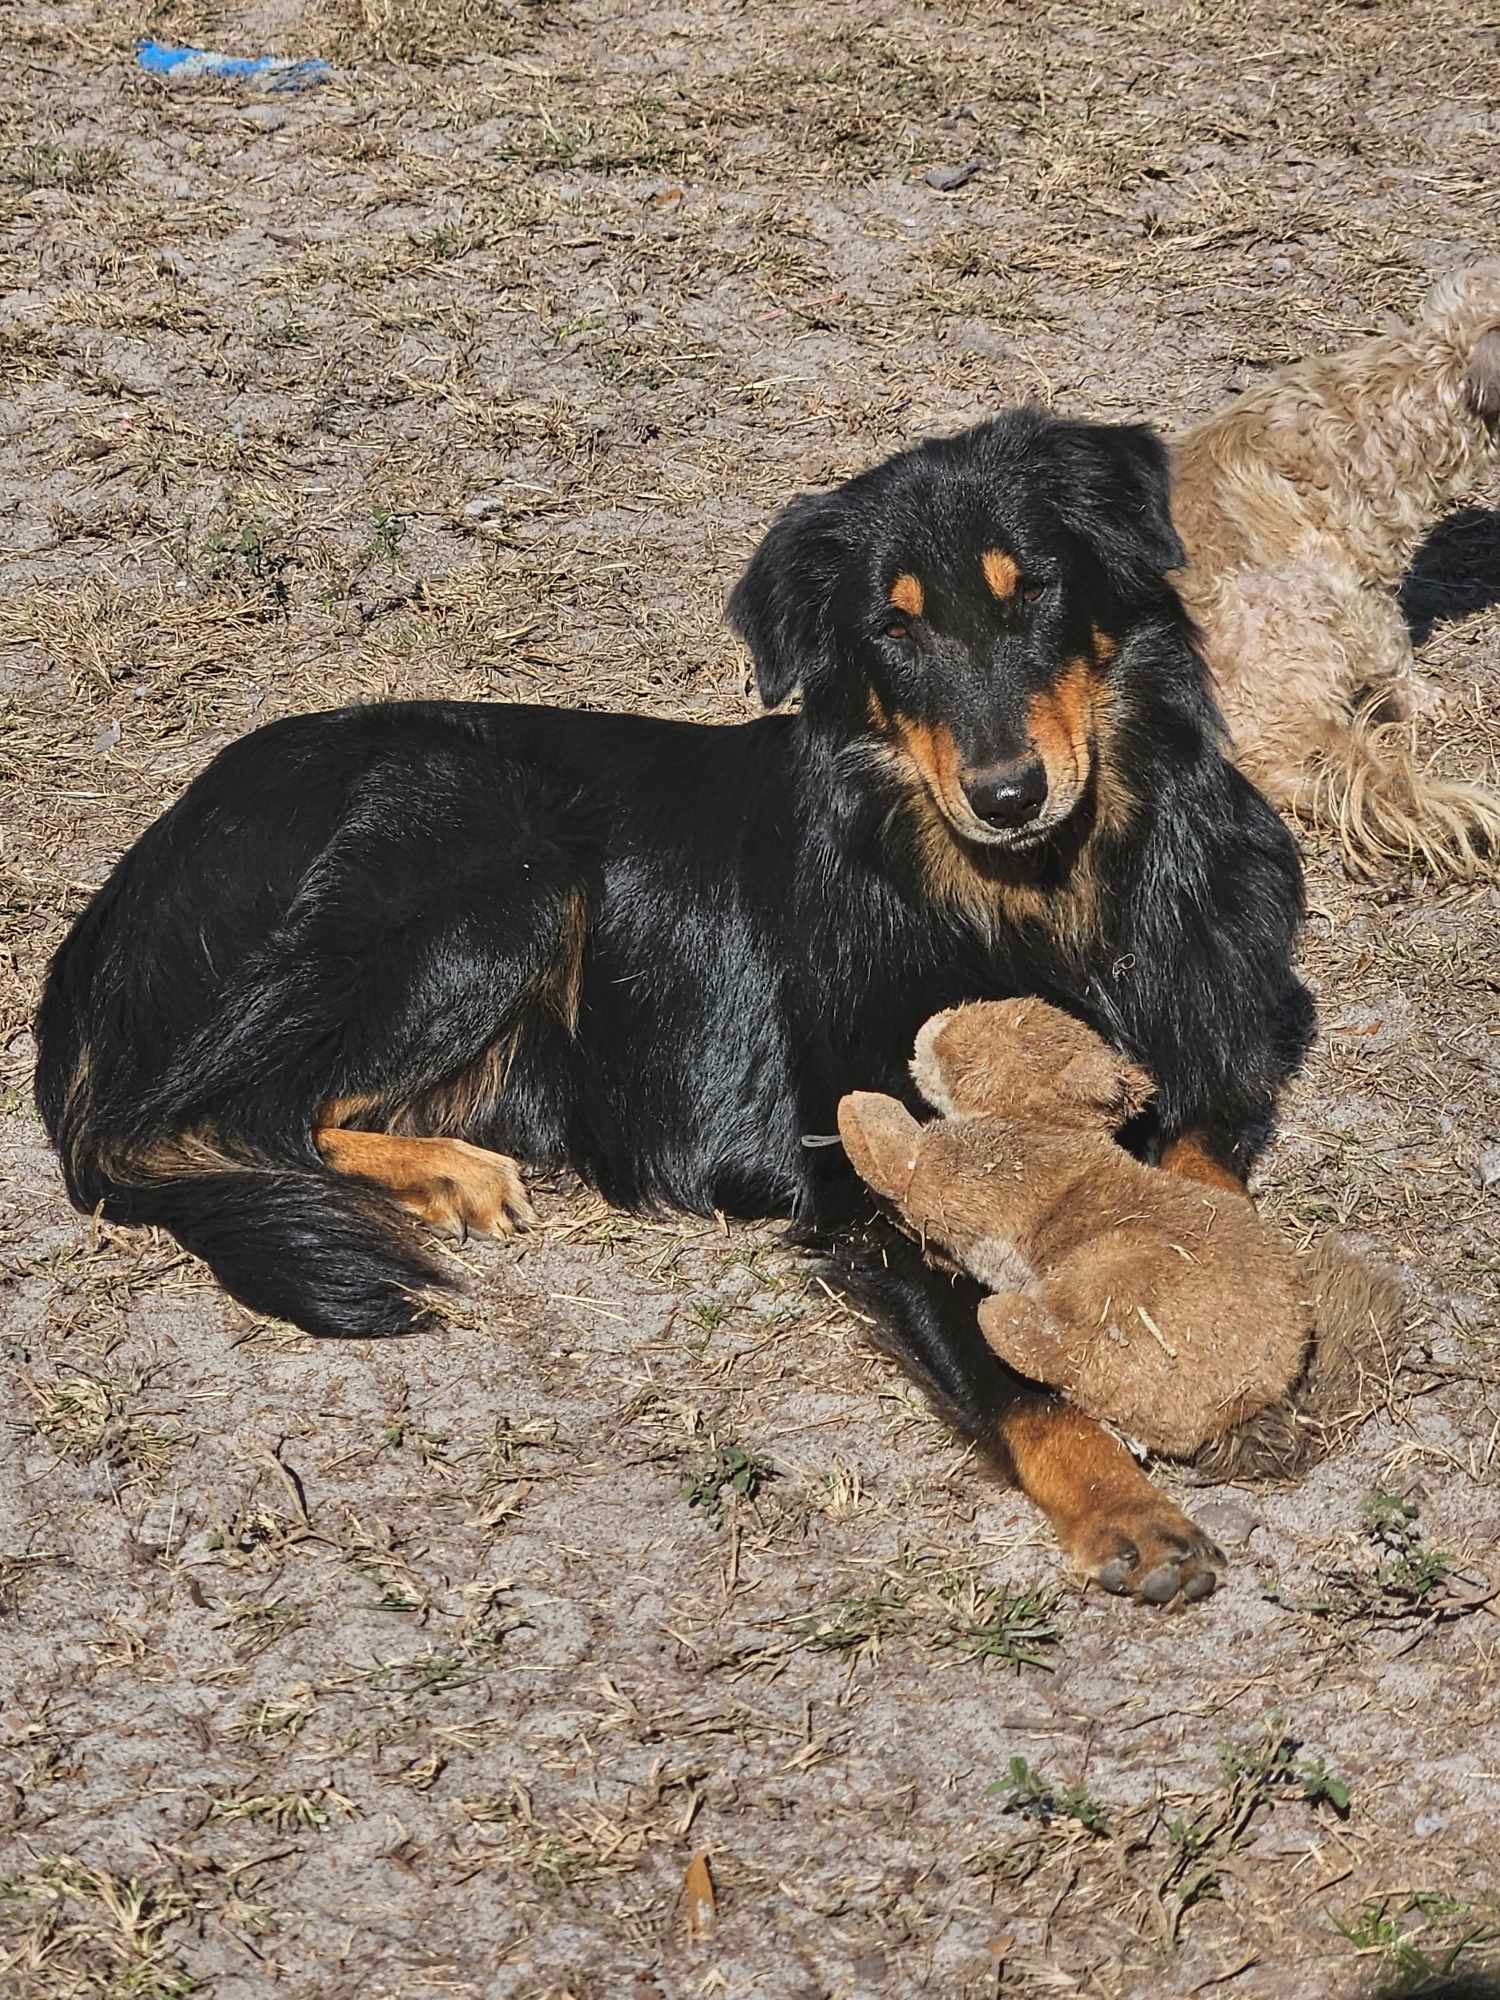 A black and brown dog laying on the ground holding a stuffed animal